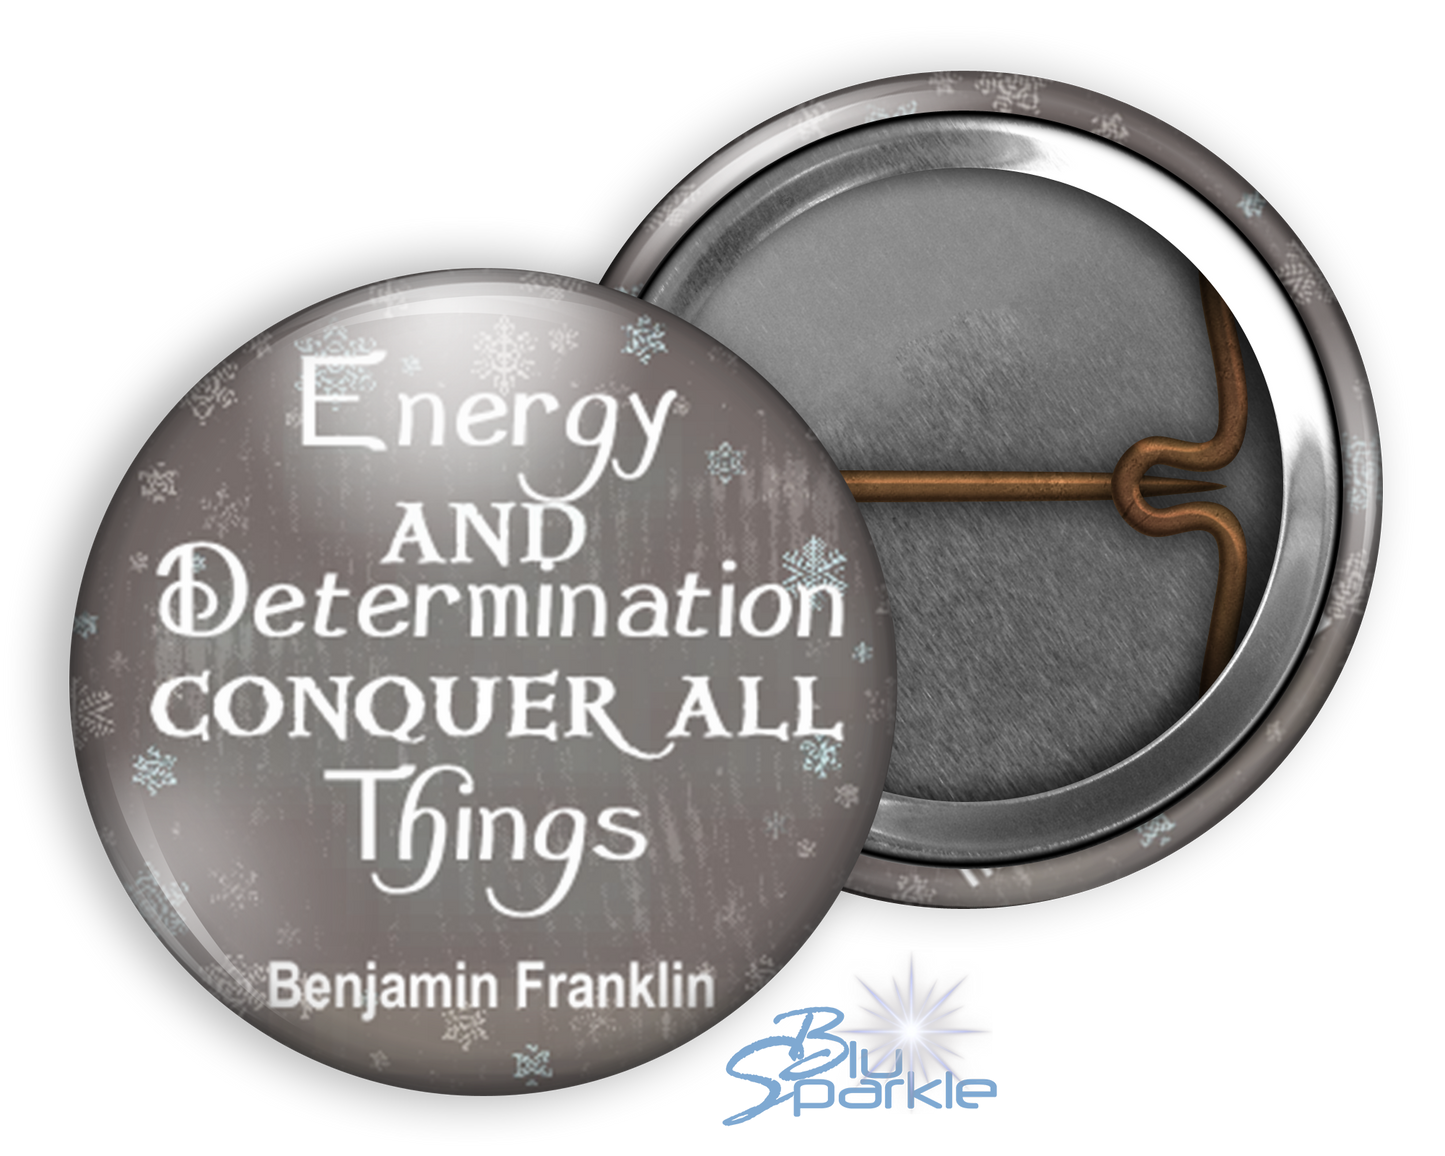 Energy And Determination Conquer All Things - Pinback Buttons